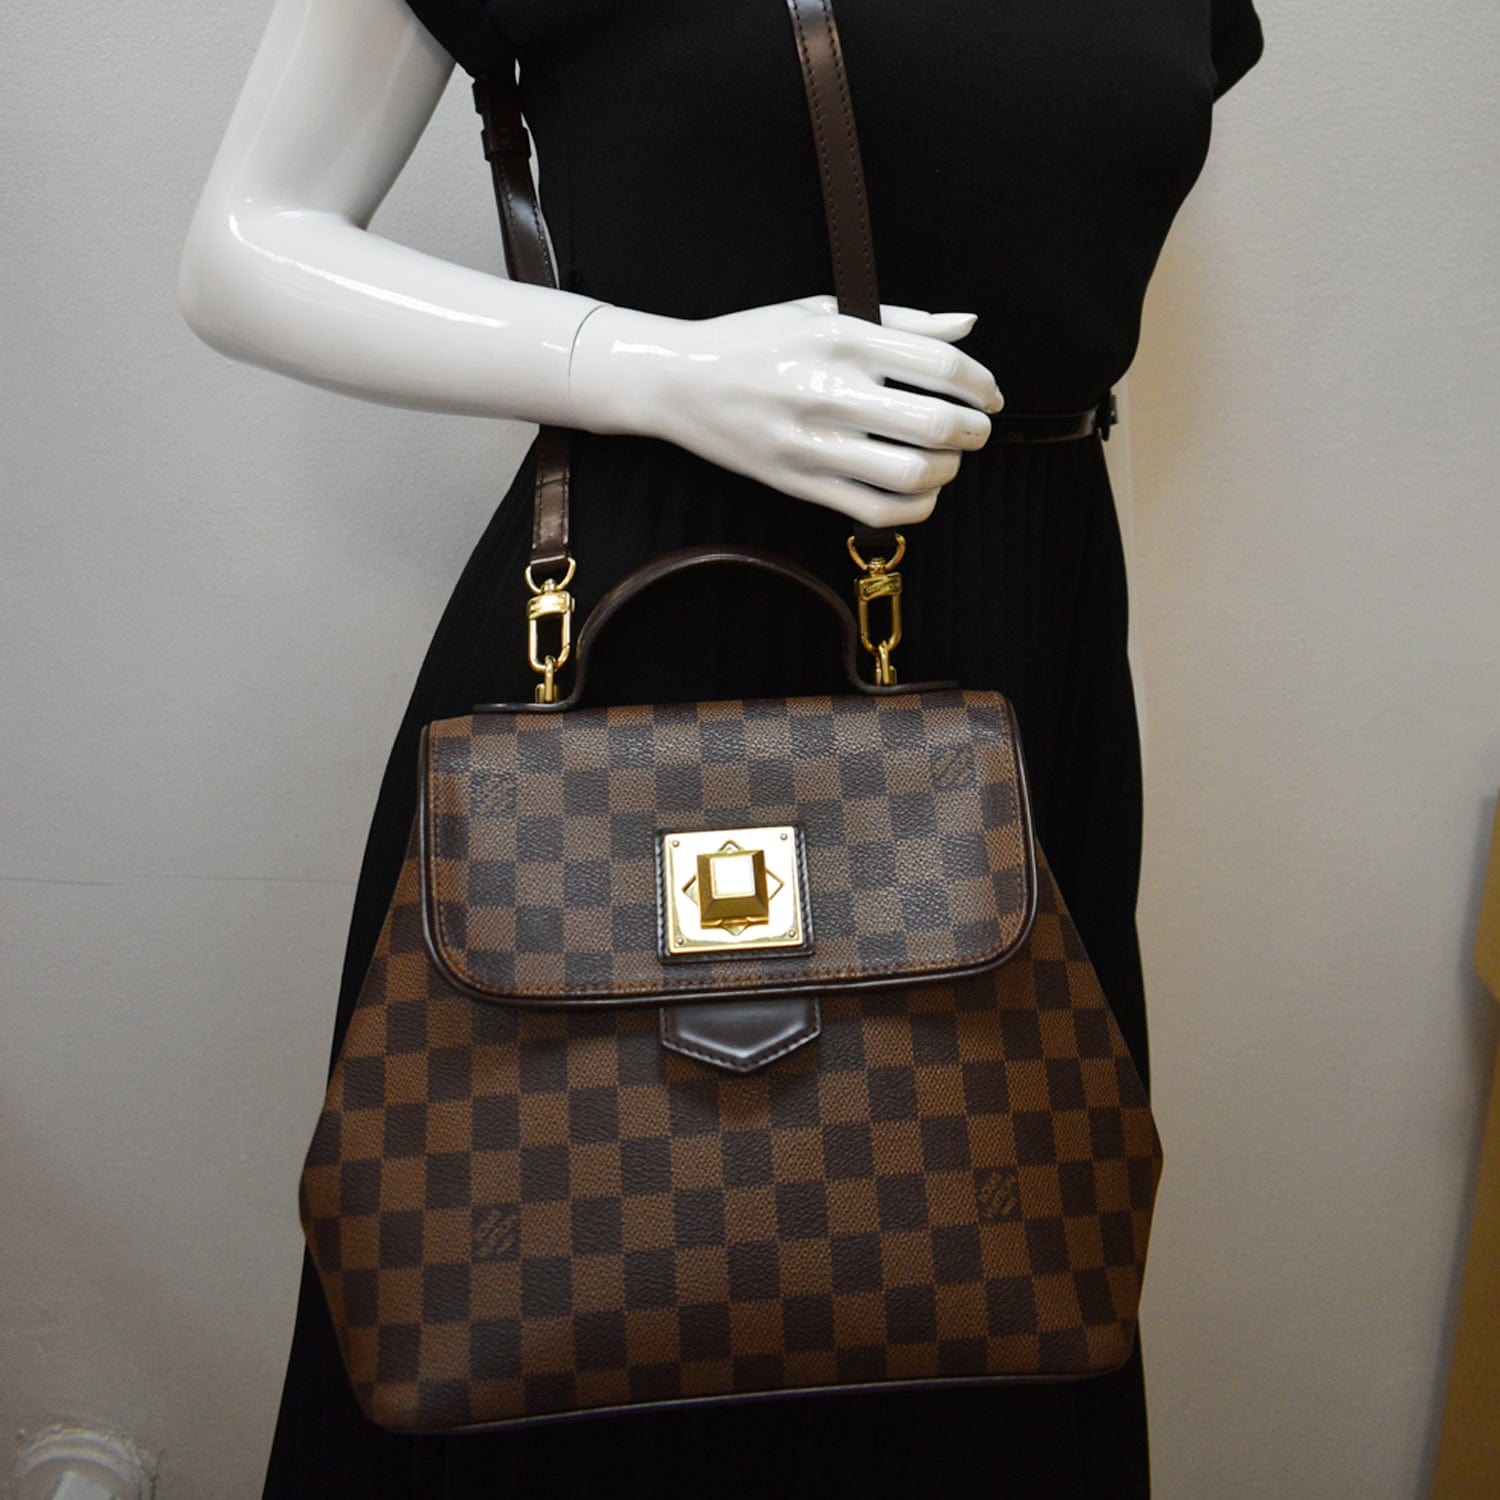 In LVoe with Louis Vuitton: Louis Vuitton Damier Bergamo UPDATE: Collection  released Nov. 2!